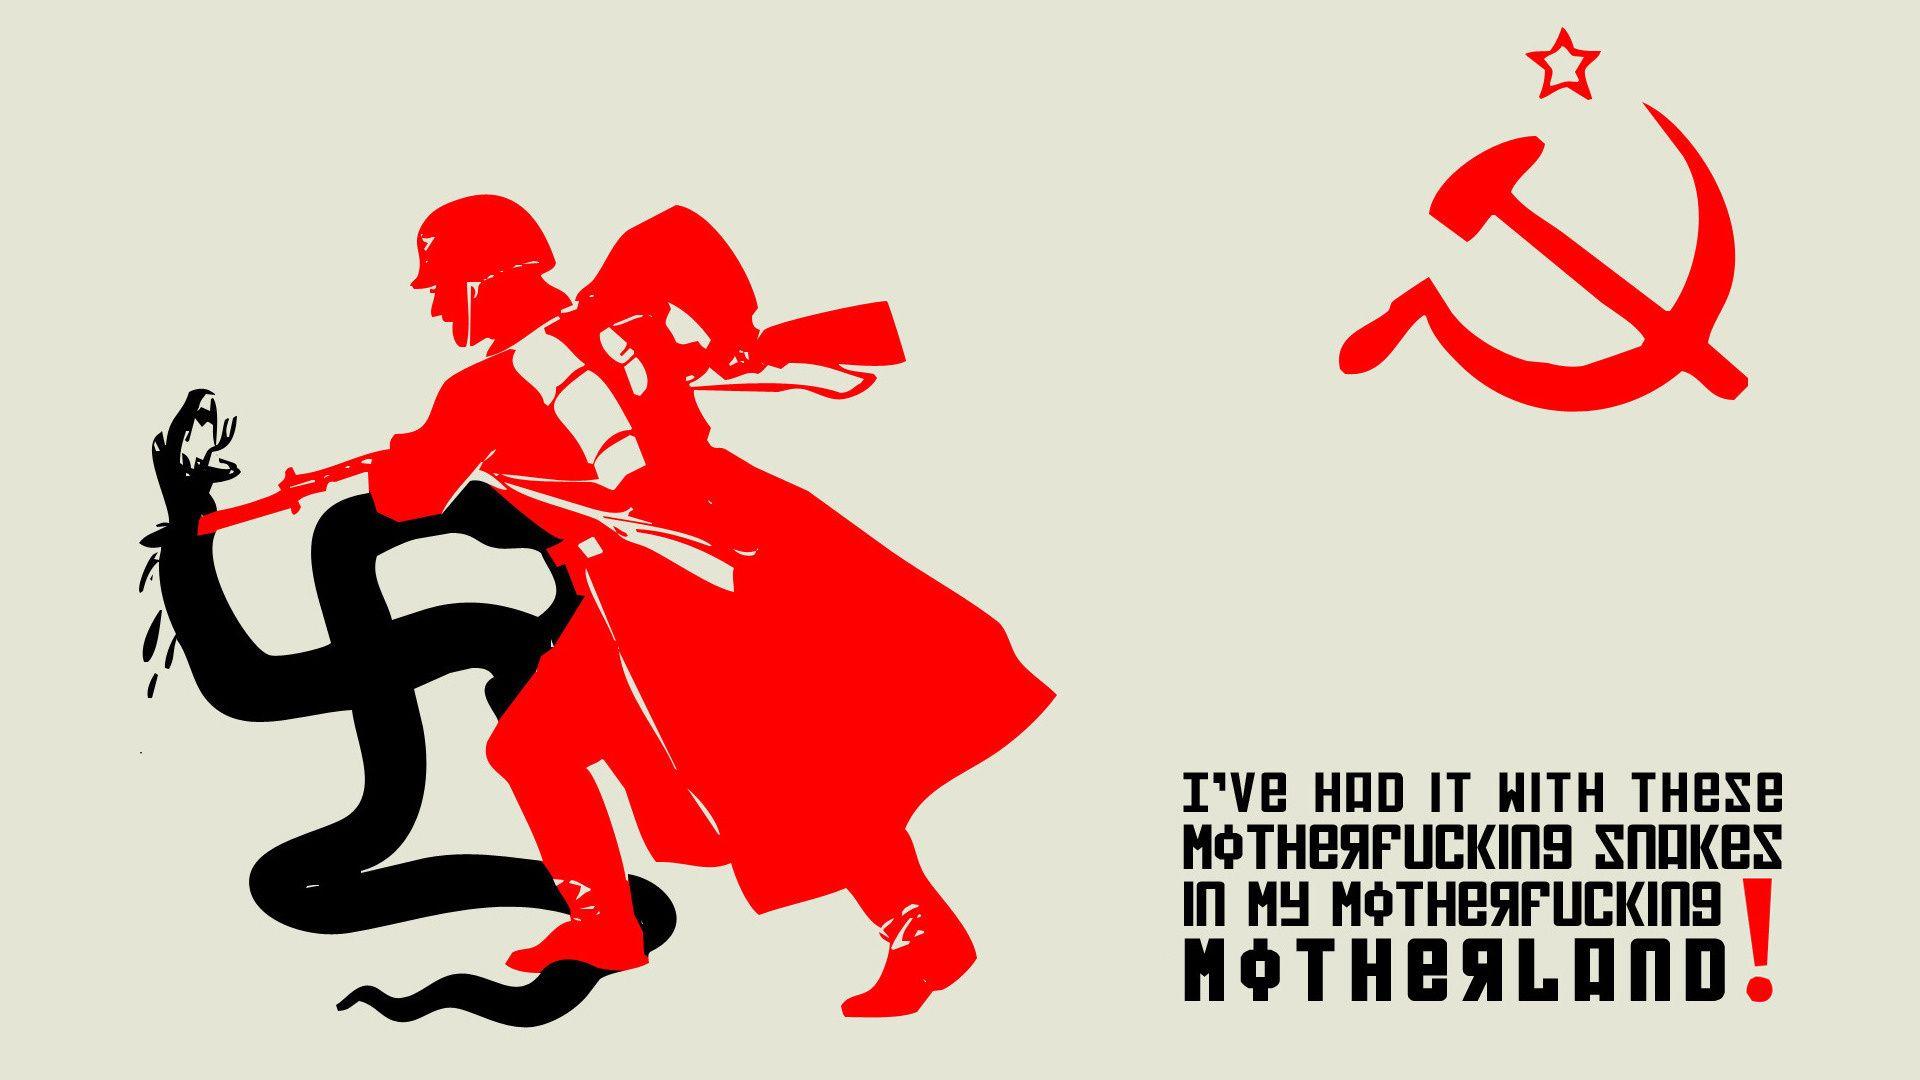 The Swastika, Hammer And Sickle, Soldiers, The Ussr